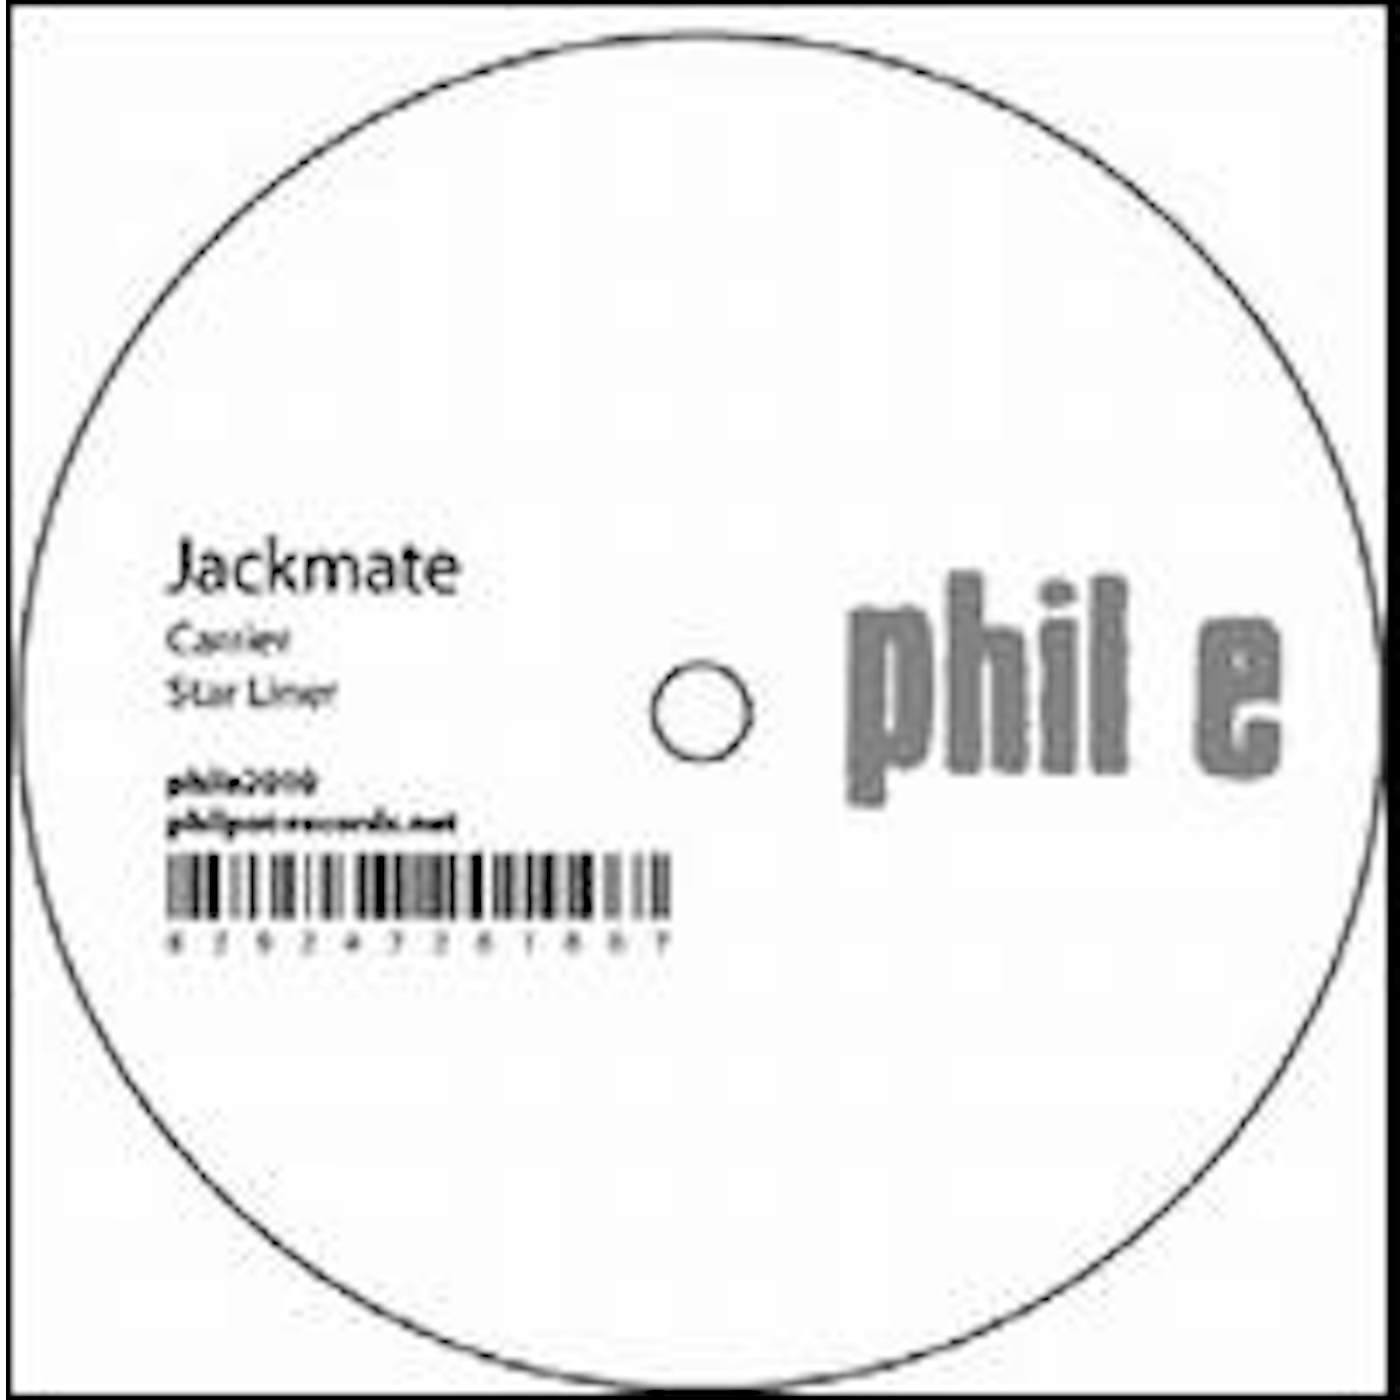 Jackmate Carrier Vinyl Record